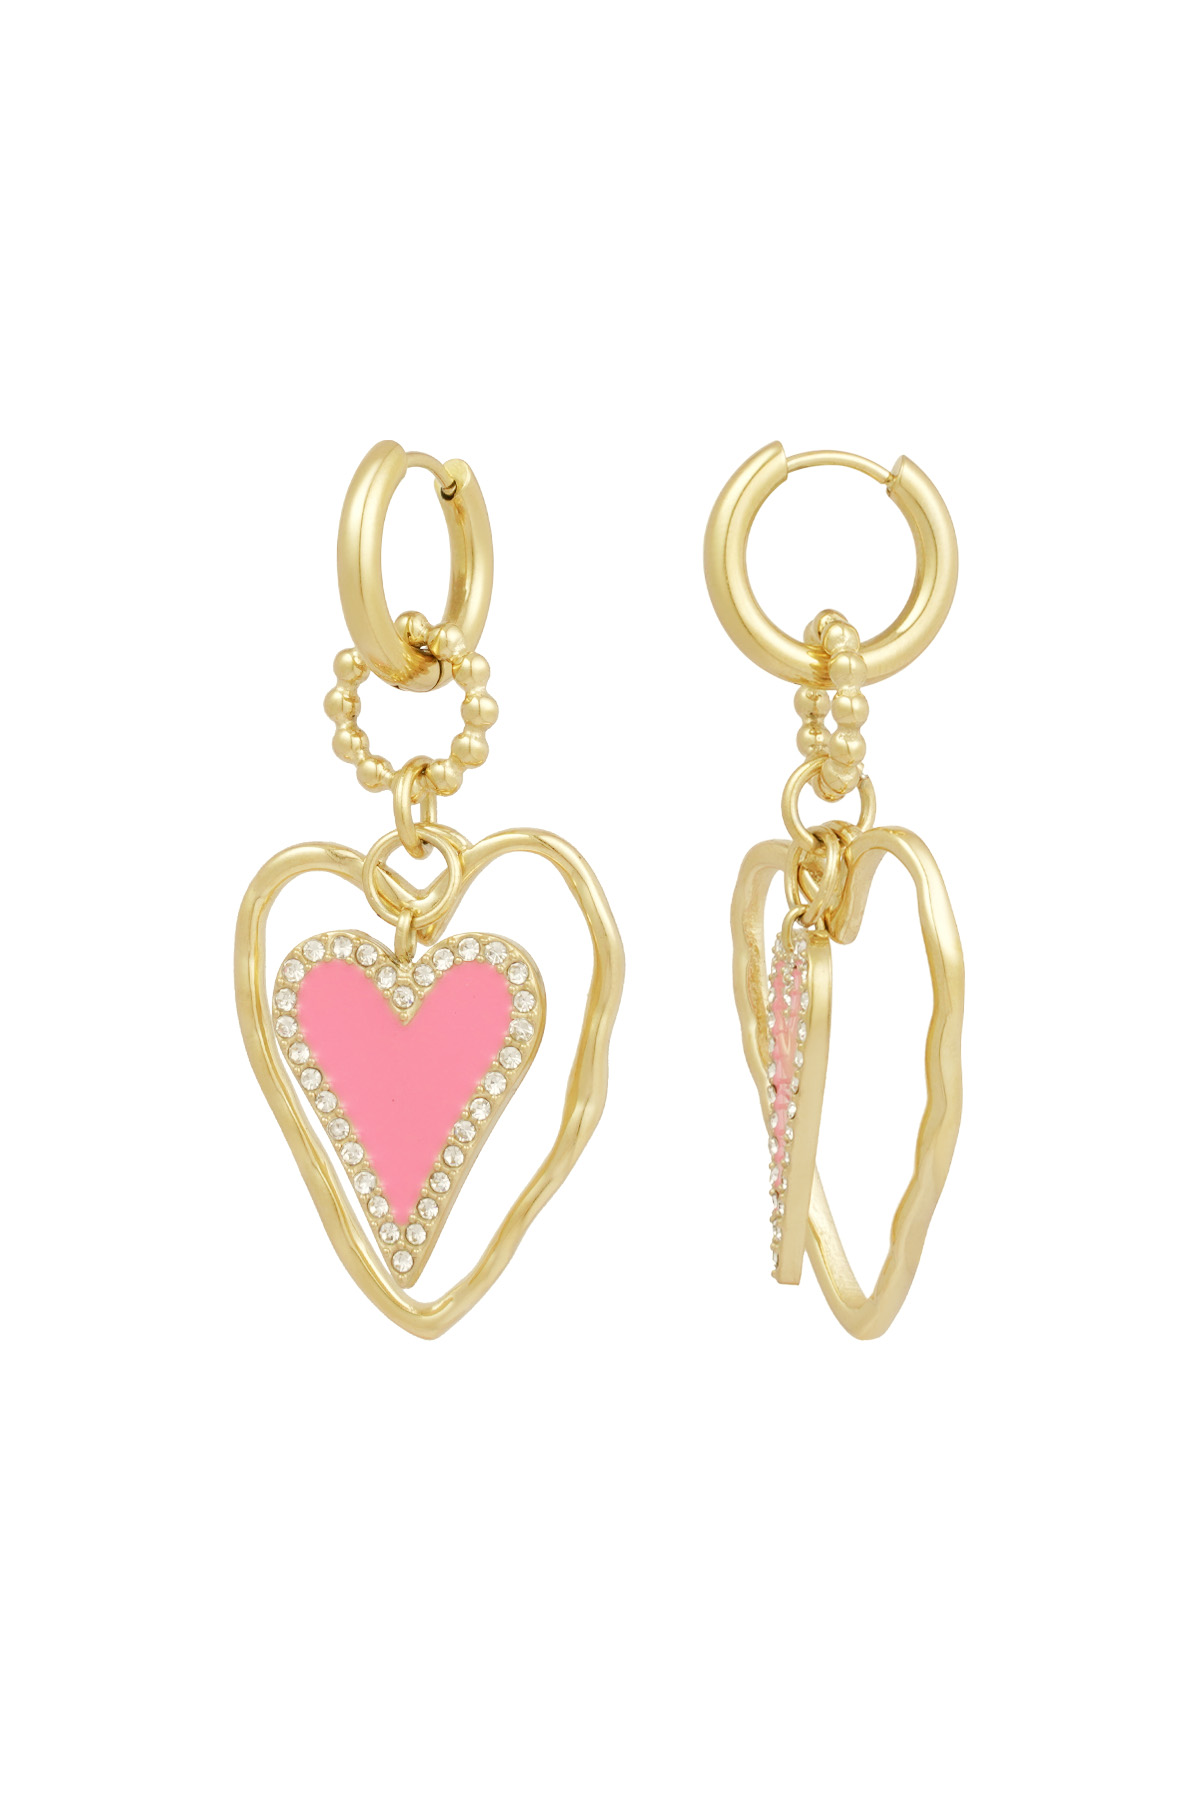 Boucles d'oreilles lovers madhouse - or rose h5 